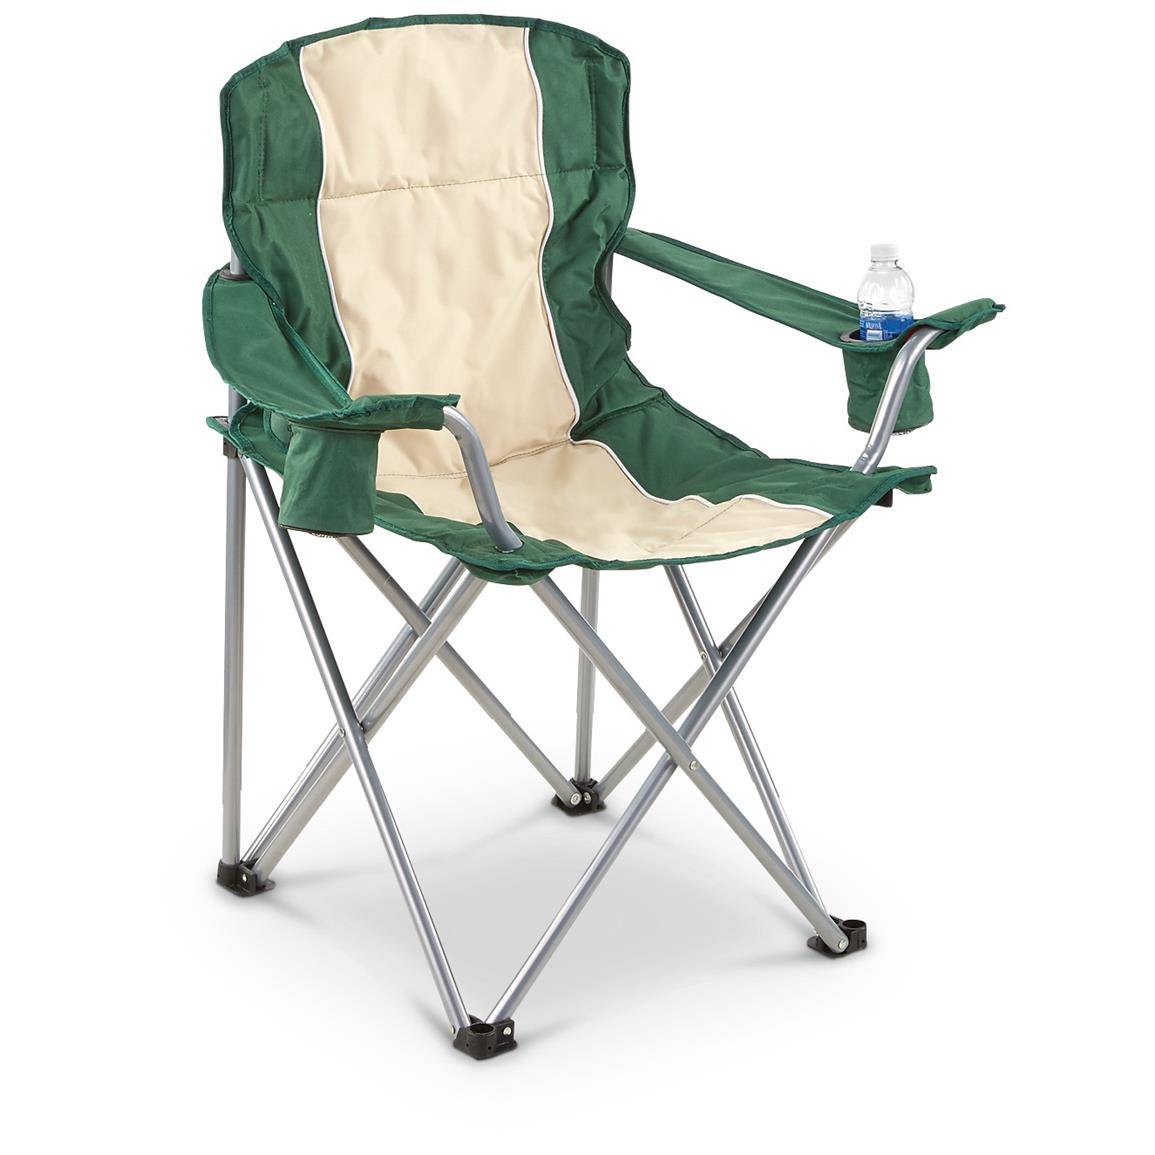 Outdoor Folding Camping Chairs - 658552, Camping Chairs at Sportsman's